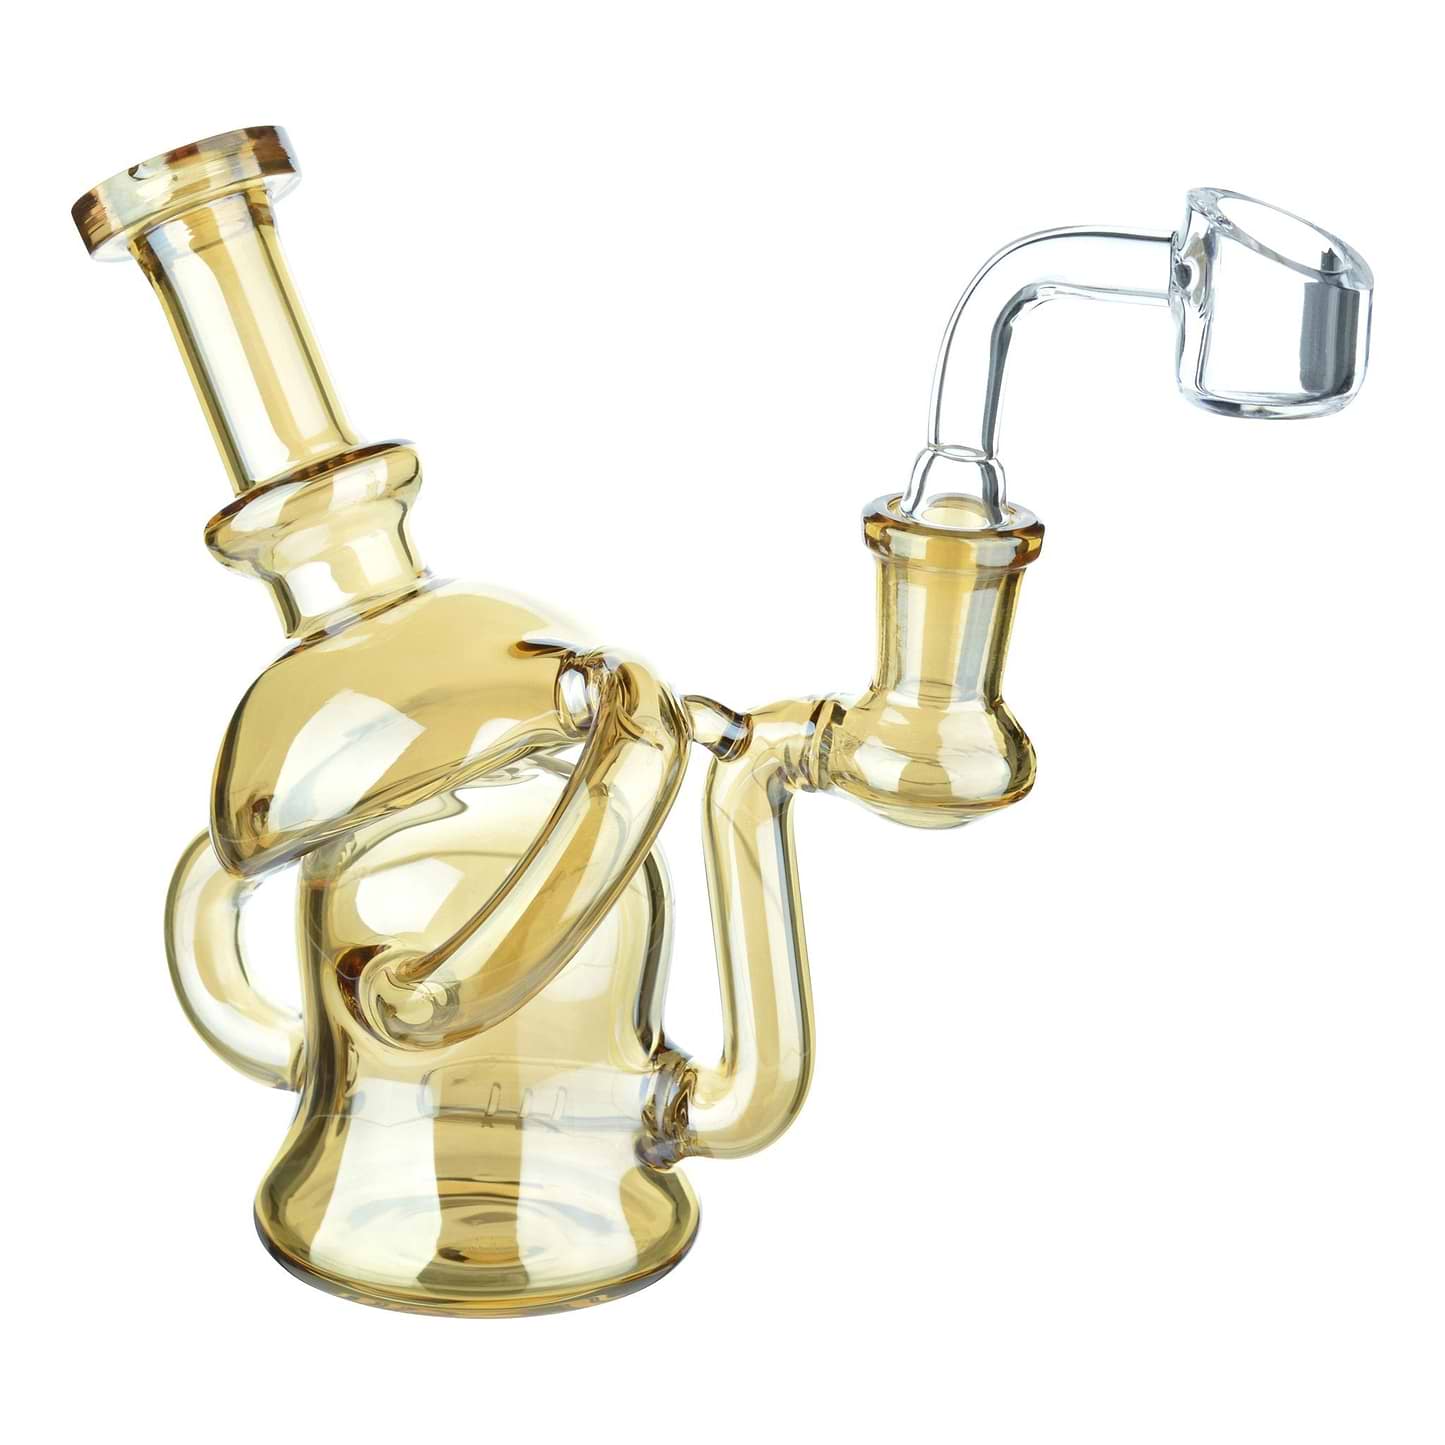 Full shot of 6-inch copper colored glass recycler dab rig mouthpiece on left banger on right opening visible